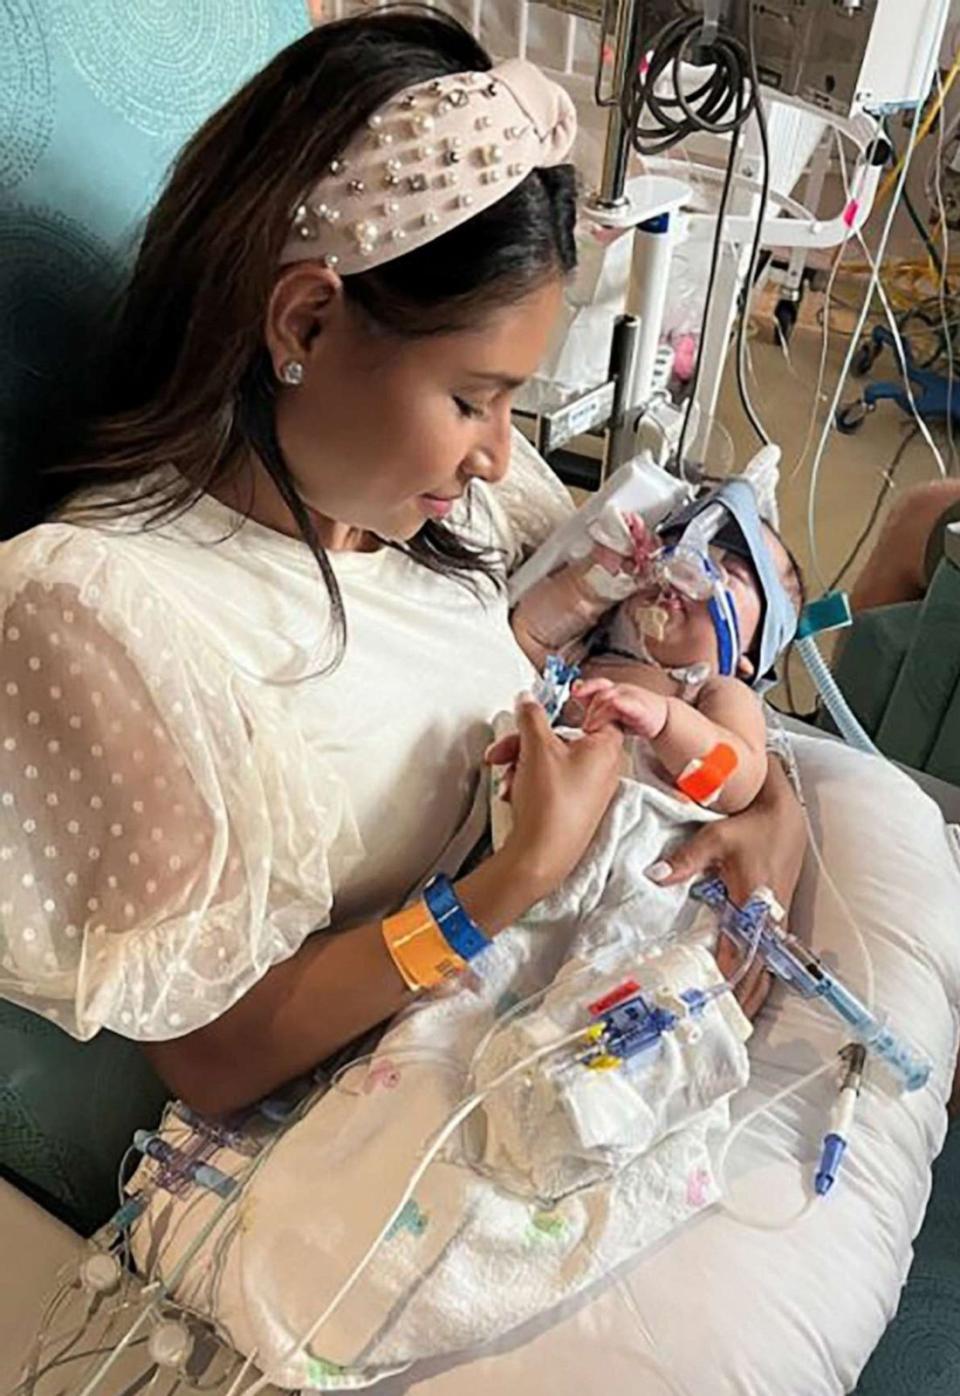 PHOTO: Sandy Fuller holds one of her twin daughters following separation surgery at Texas Children's Hospital. (Texas Children's Hospital)